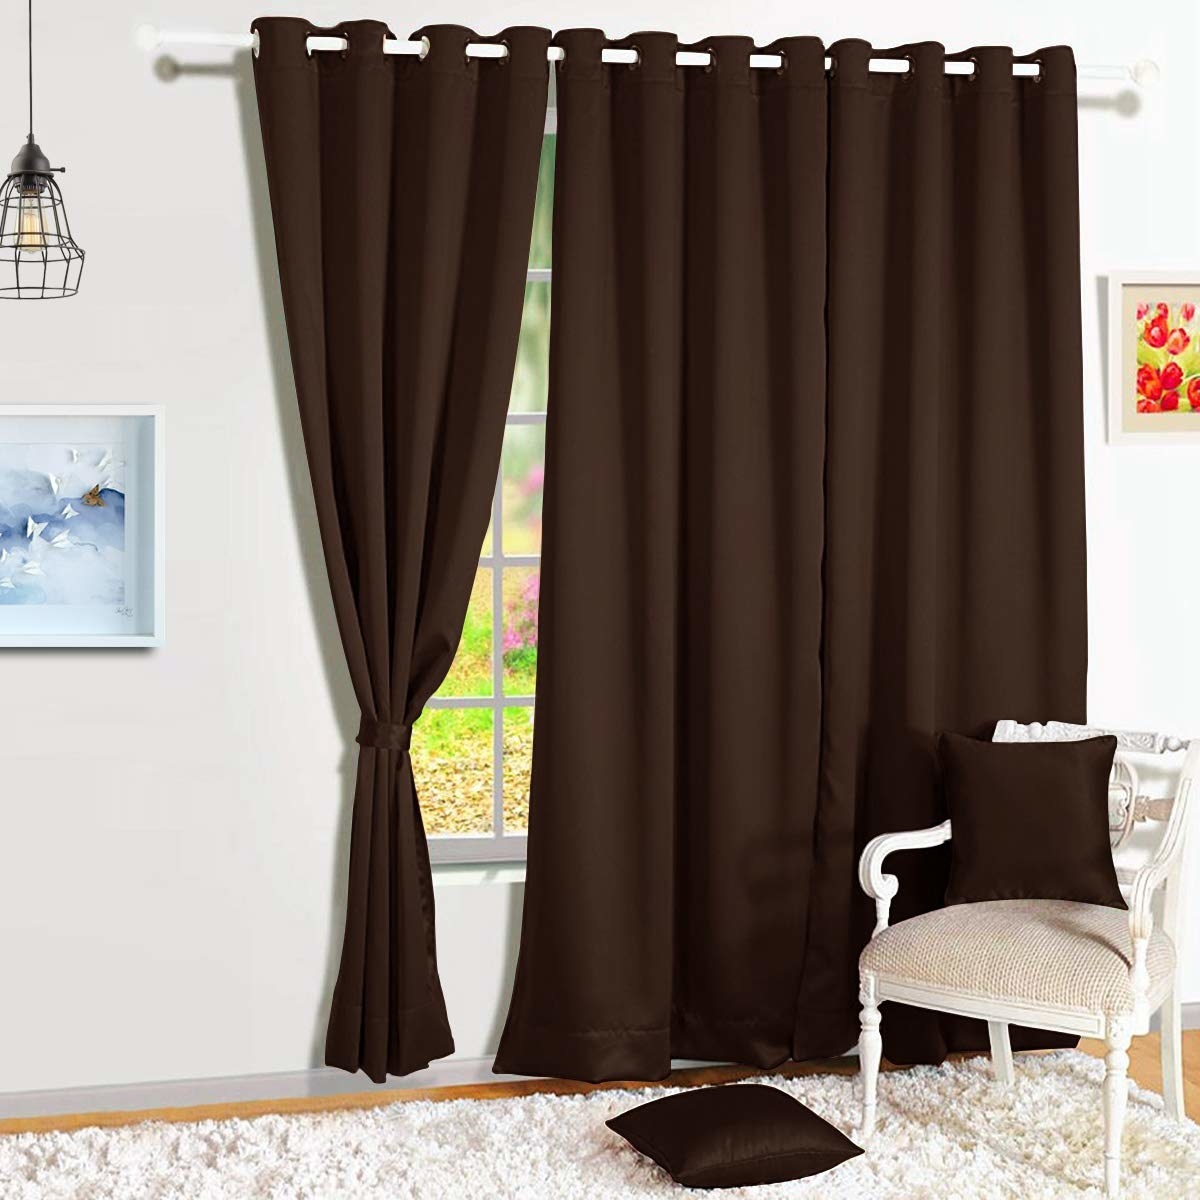 A pair of brown blackout curtains on a window.